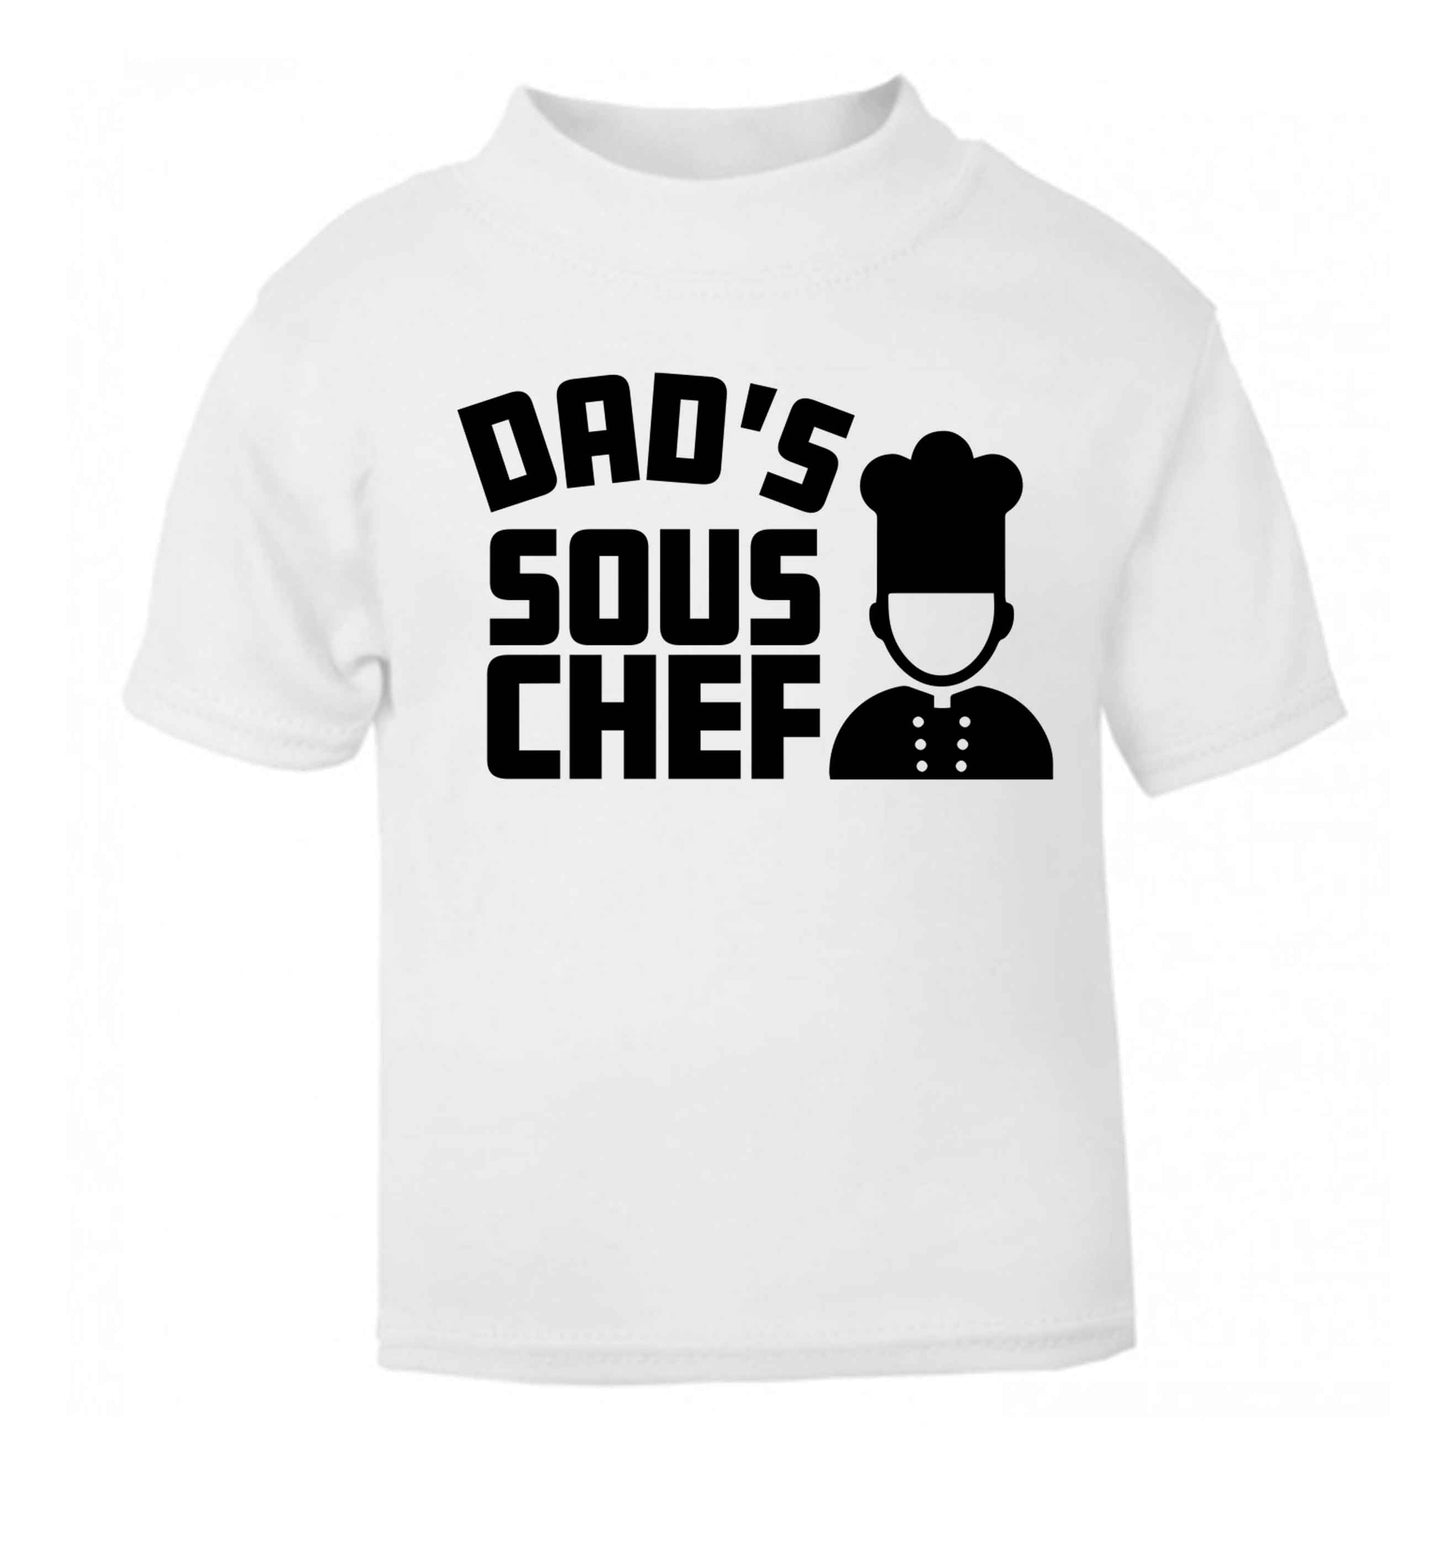 Dad's sous chef white baby toddler Tshirt 2 Years